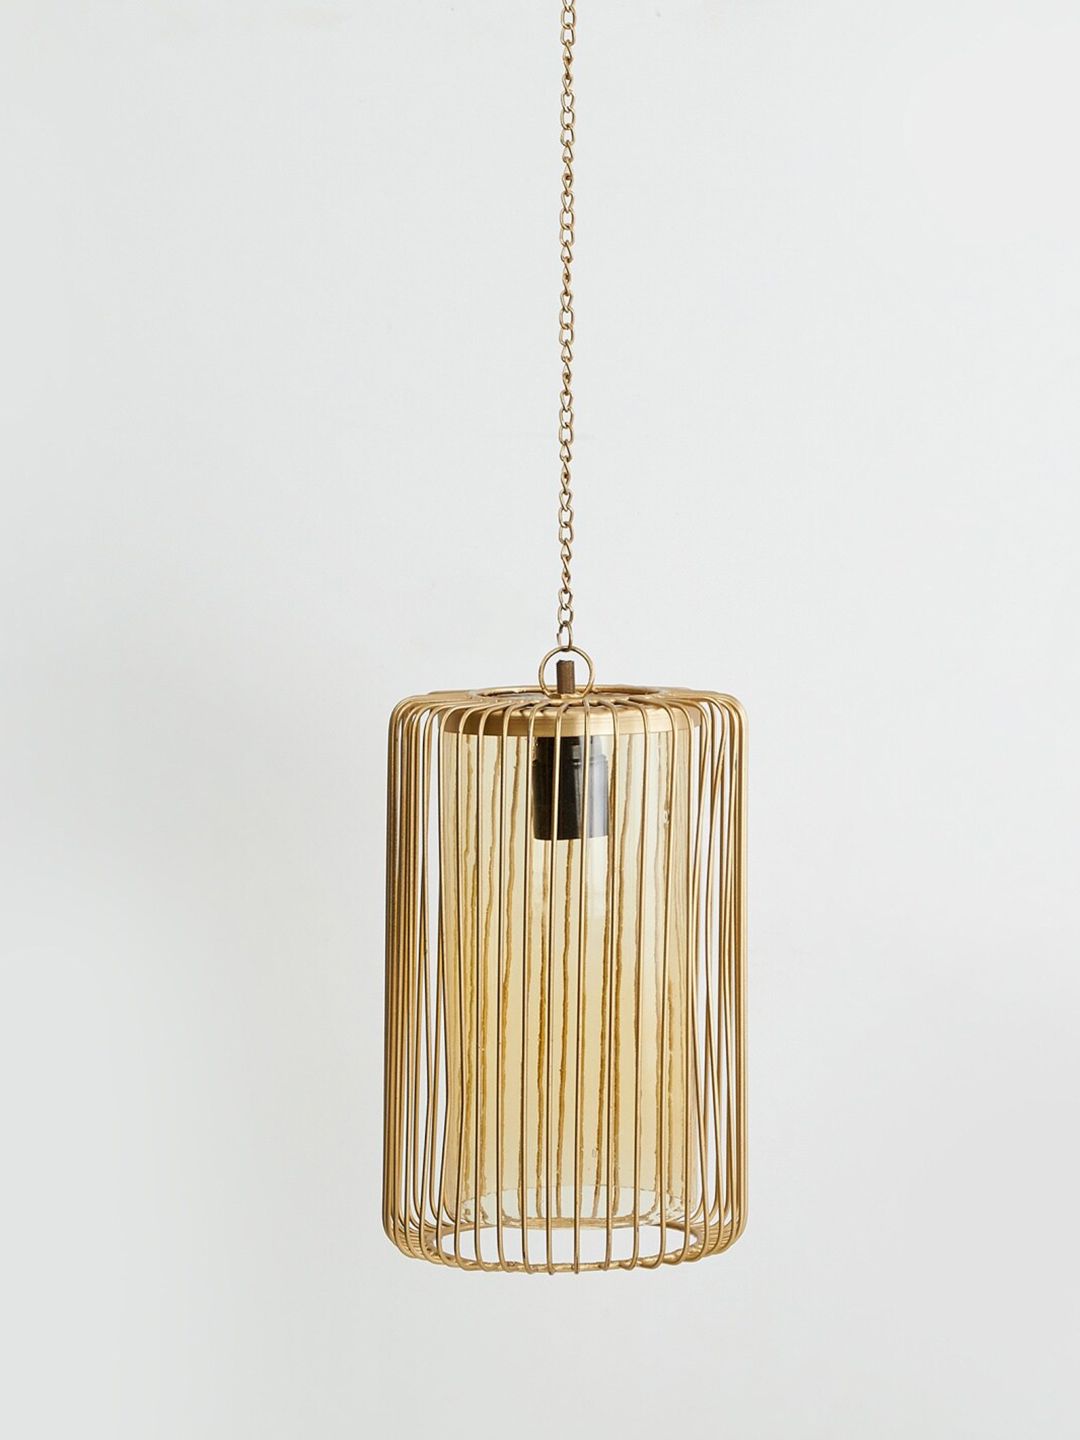 Home Centre Gold-toned Eternity Adobe Wired Hanging Pendant Lamp Price in India